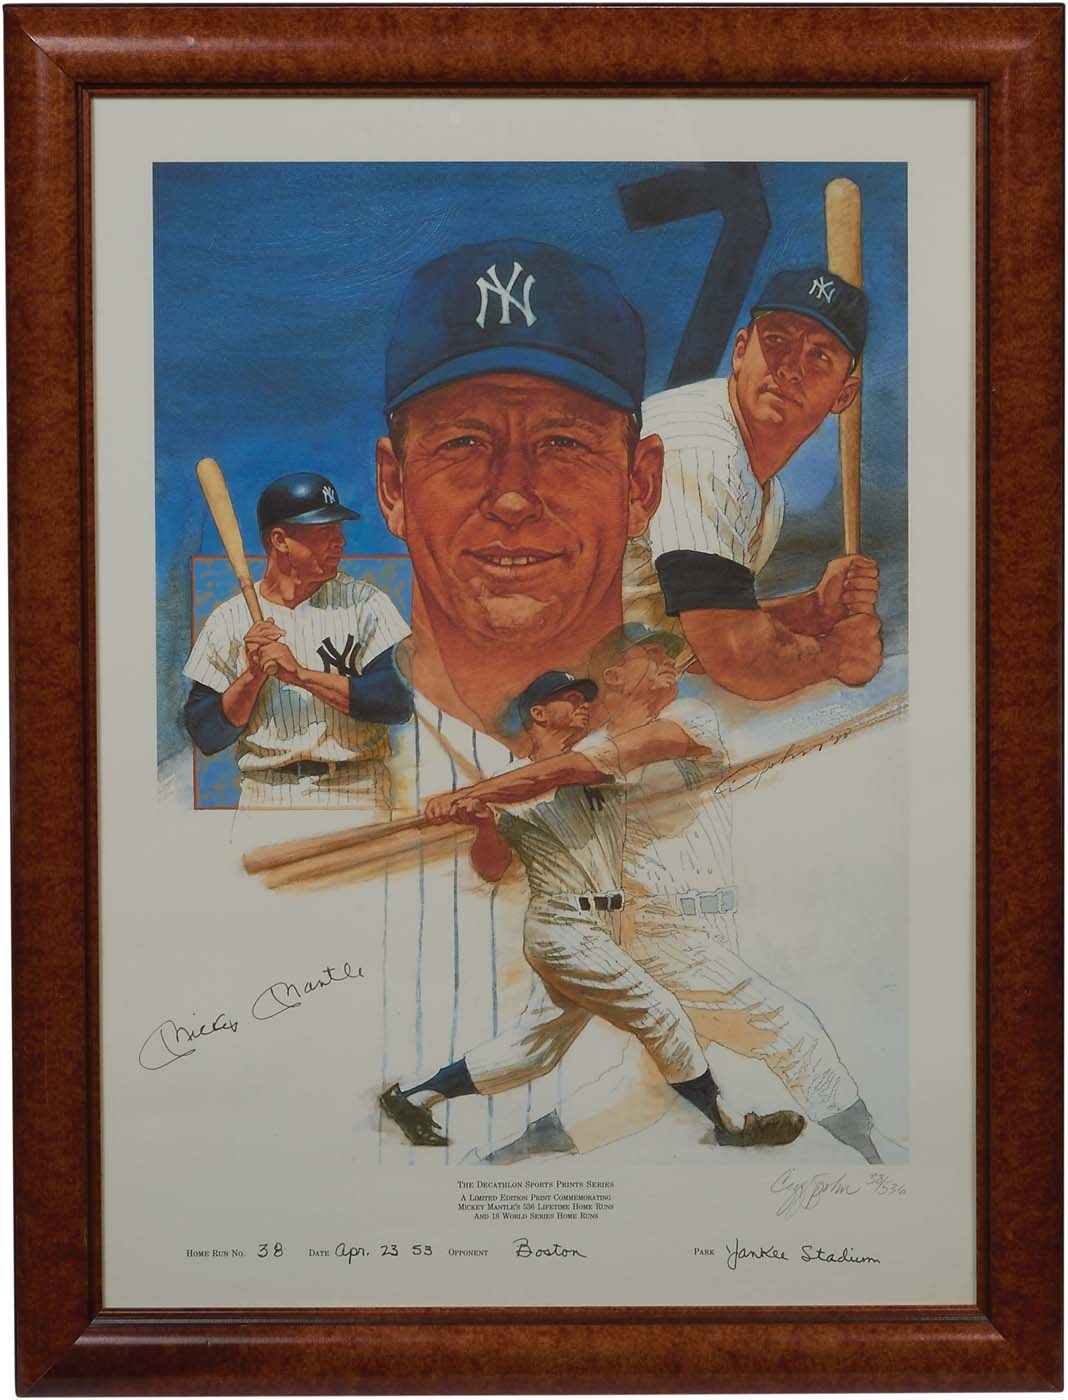 Mantle and Maris - Mickey Mantle Signed "Home Run 38" Limited Edition Print (JSA)